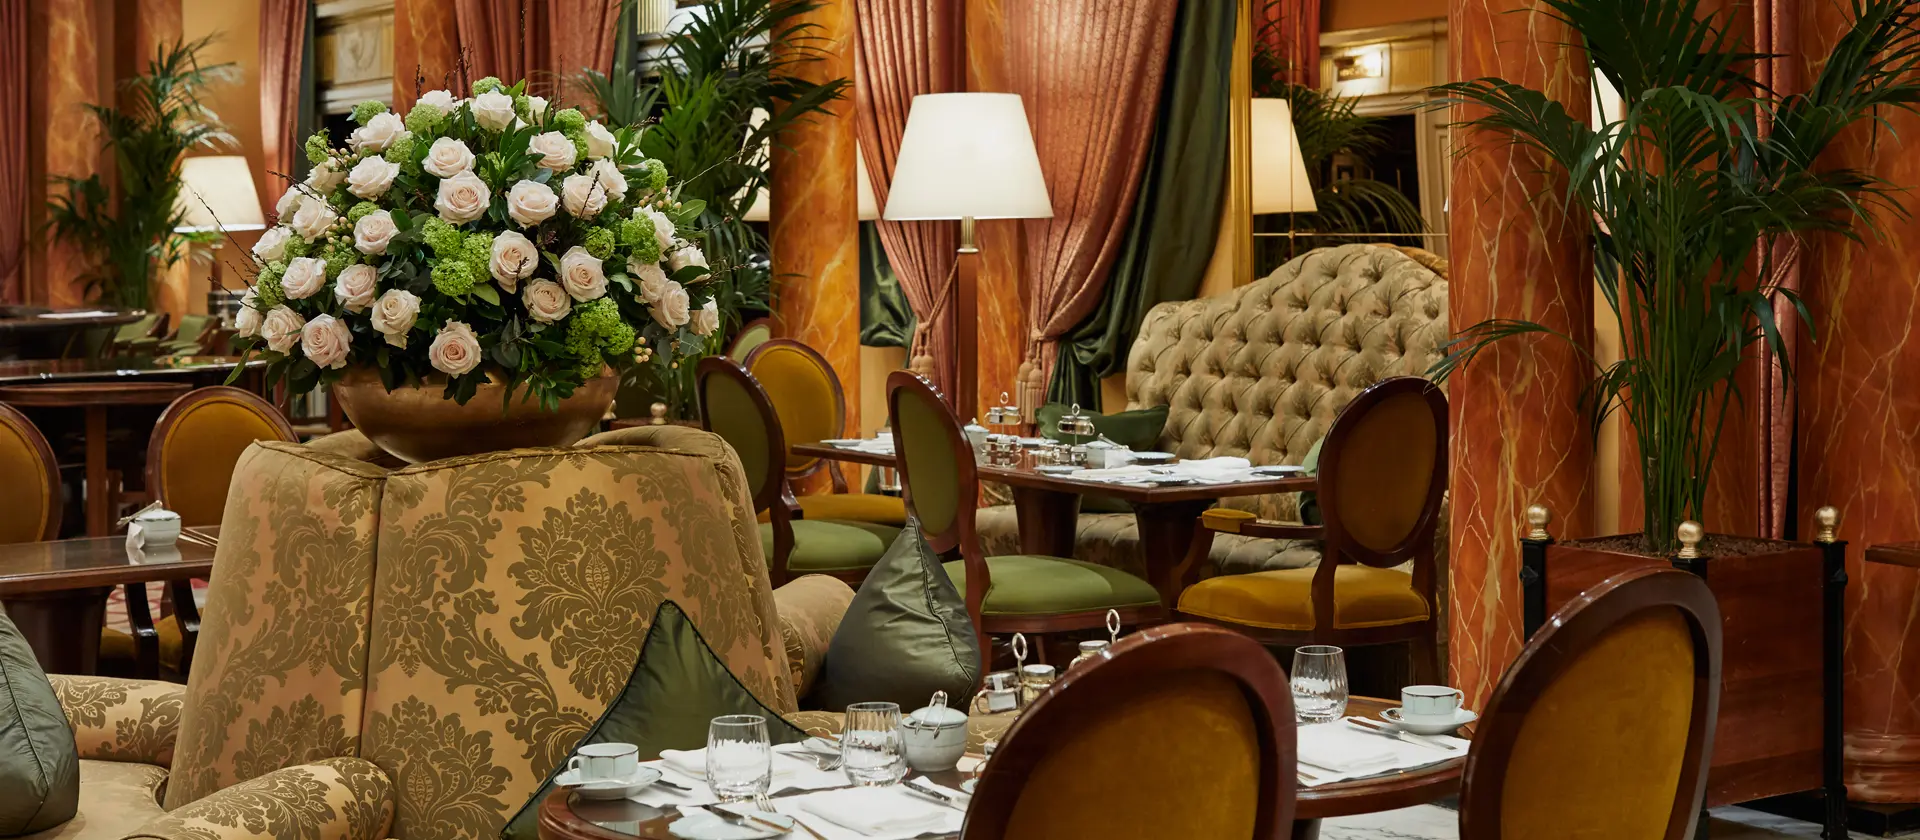 Hotel review Style' - The Dorchester - Dorchester Collection - 1